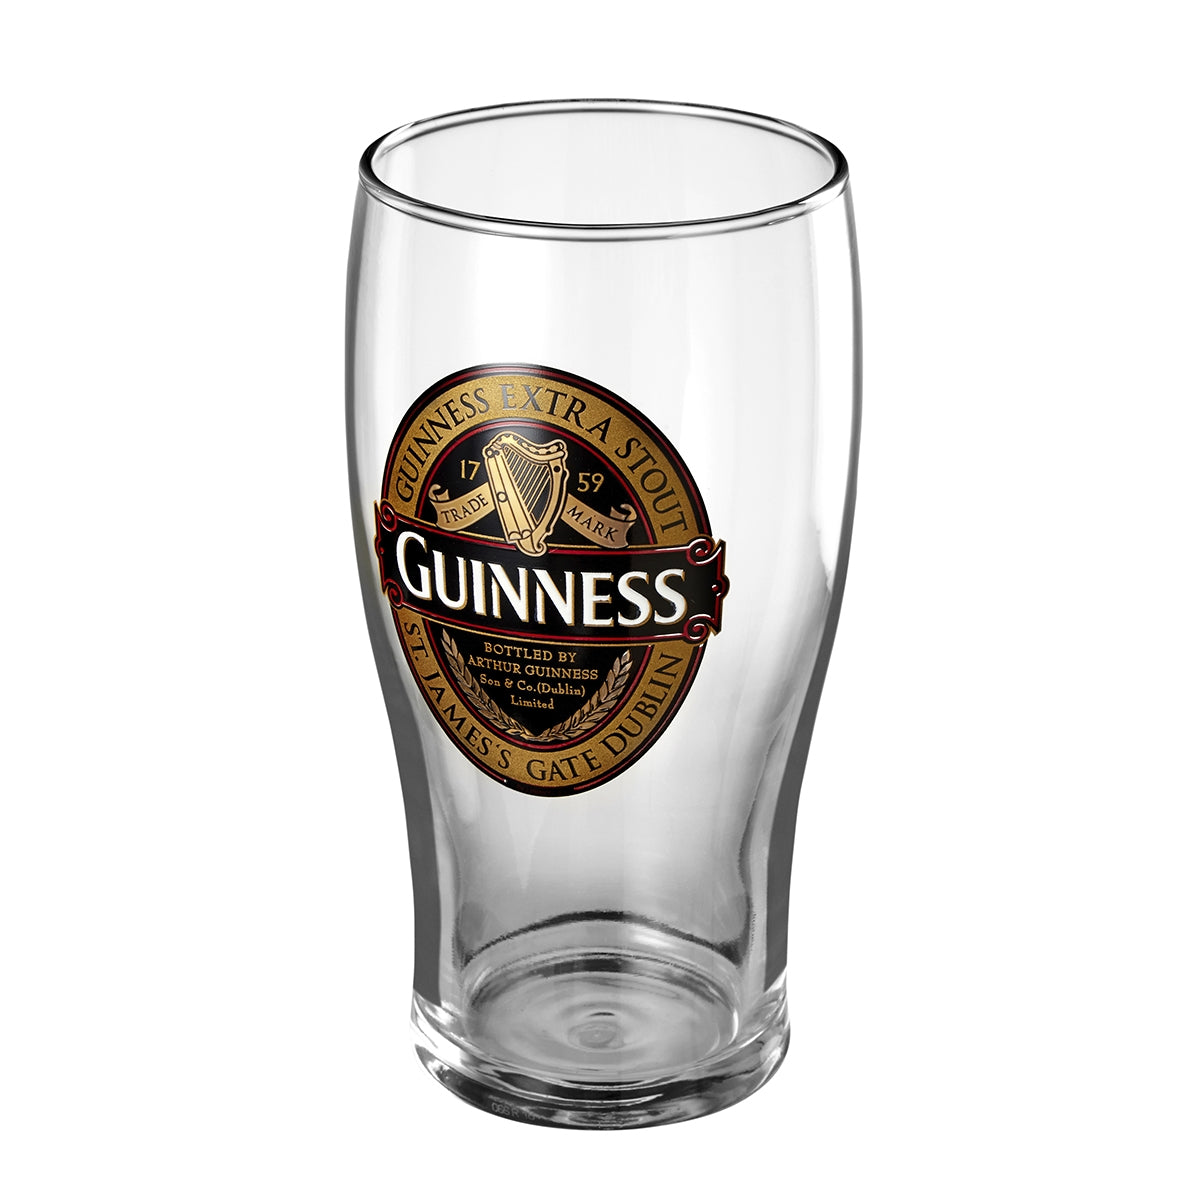 Classic Guinness pint glass. (replace with) Guinness Classic Pint Glass 24 Pack by Guinness.